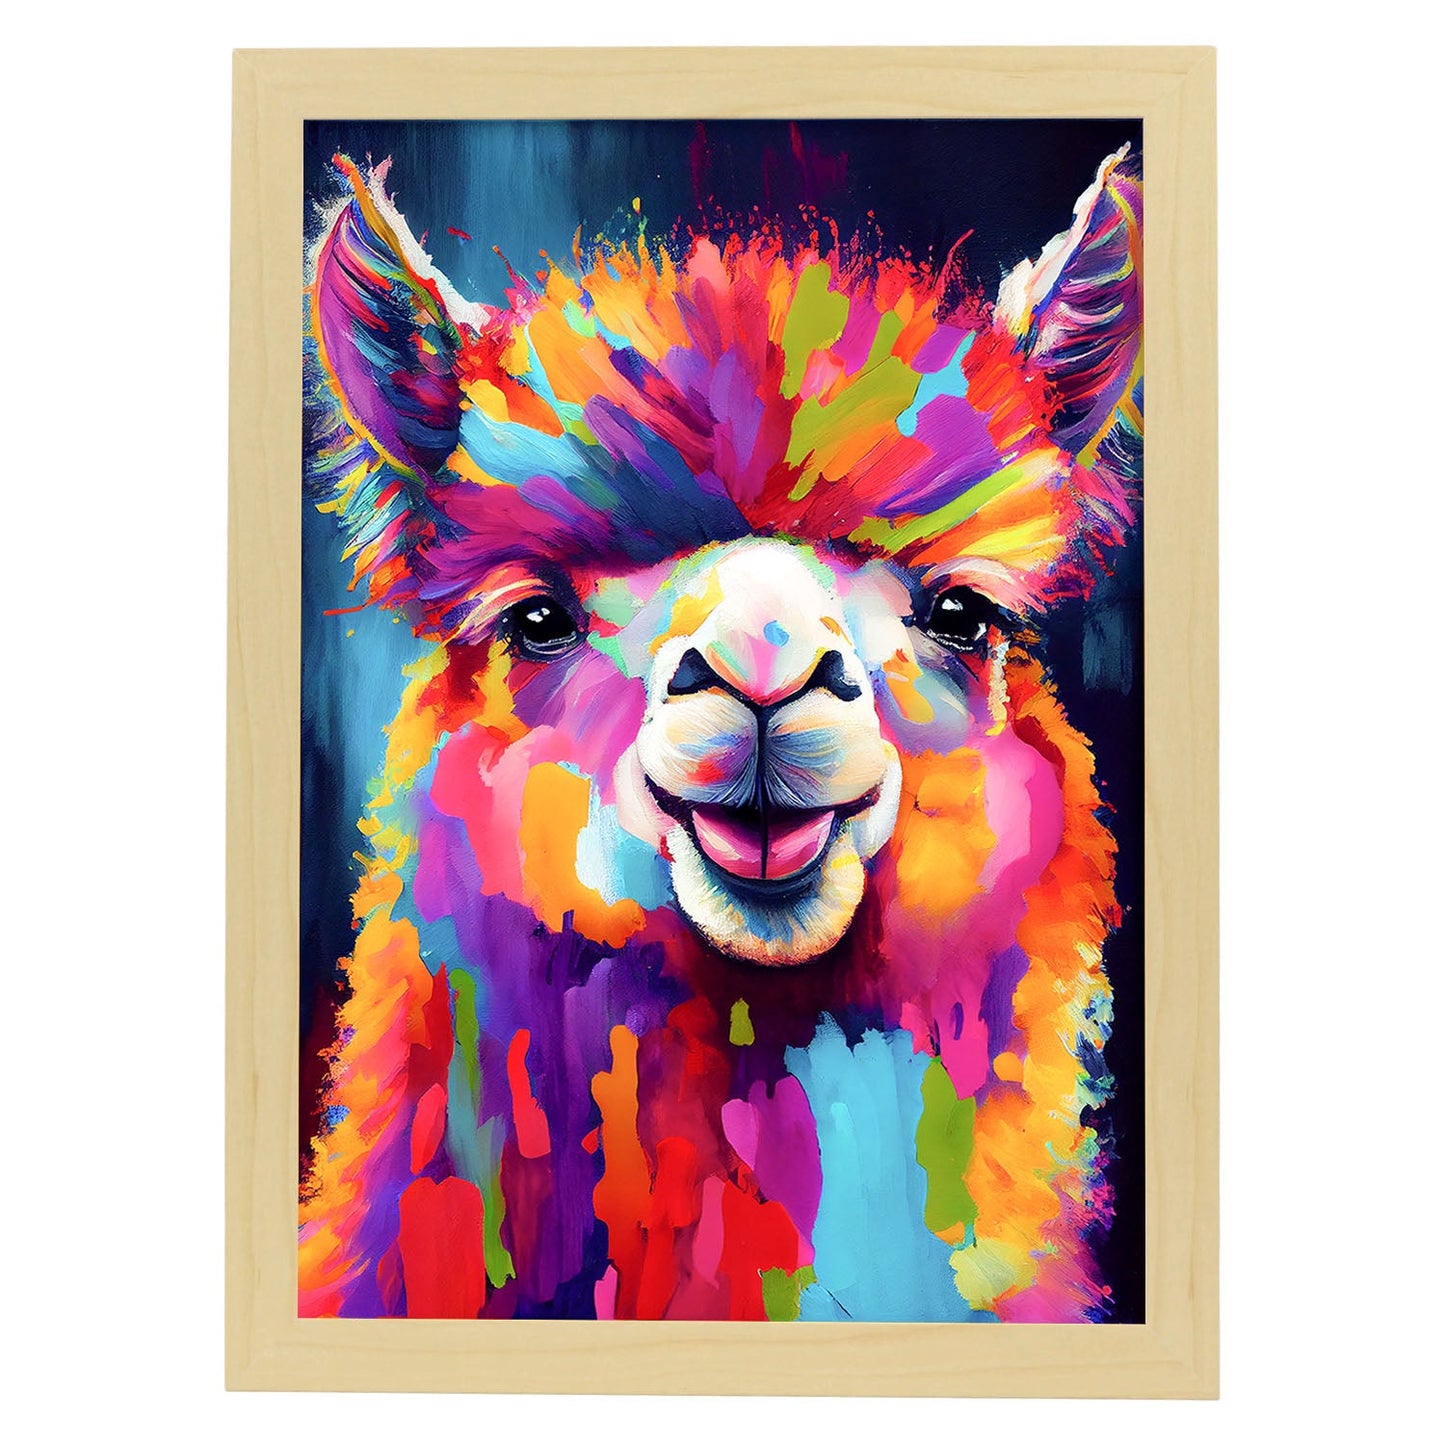 Nacnic Abstract smiling Alpaca in Lisa Fran Style_2. Aesthetic Wall Art Prints for Bedroom or Living Room Design.